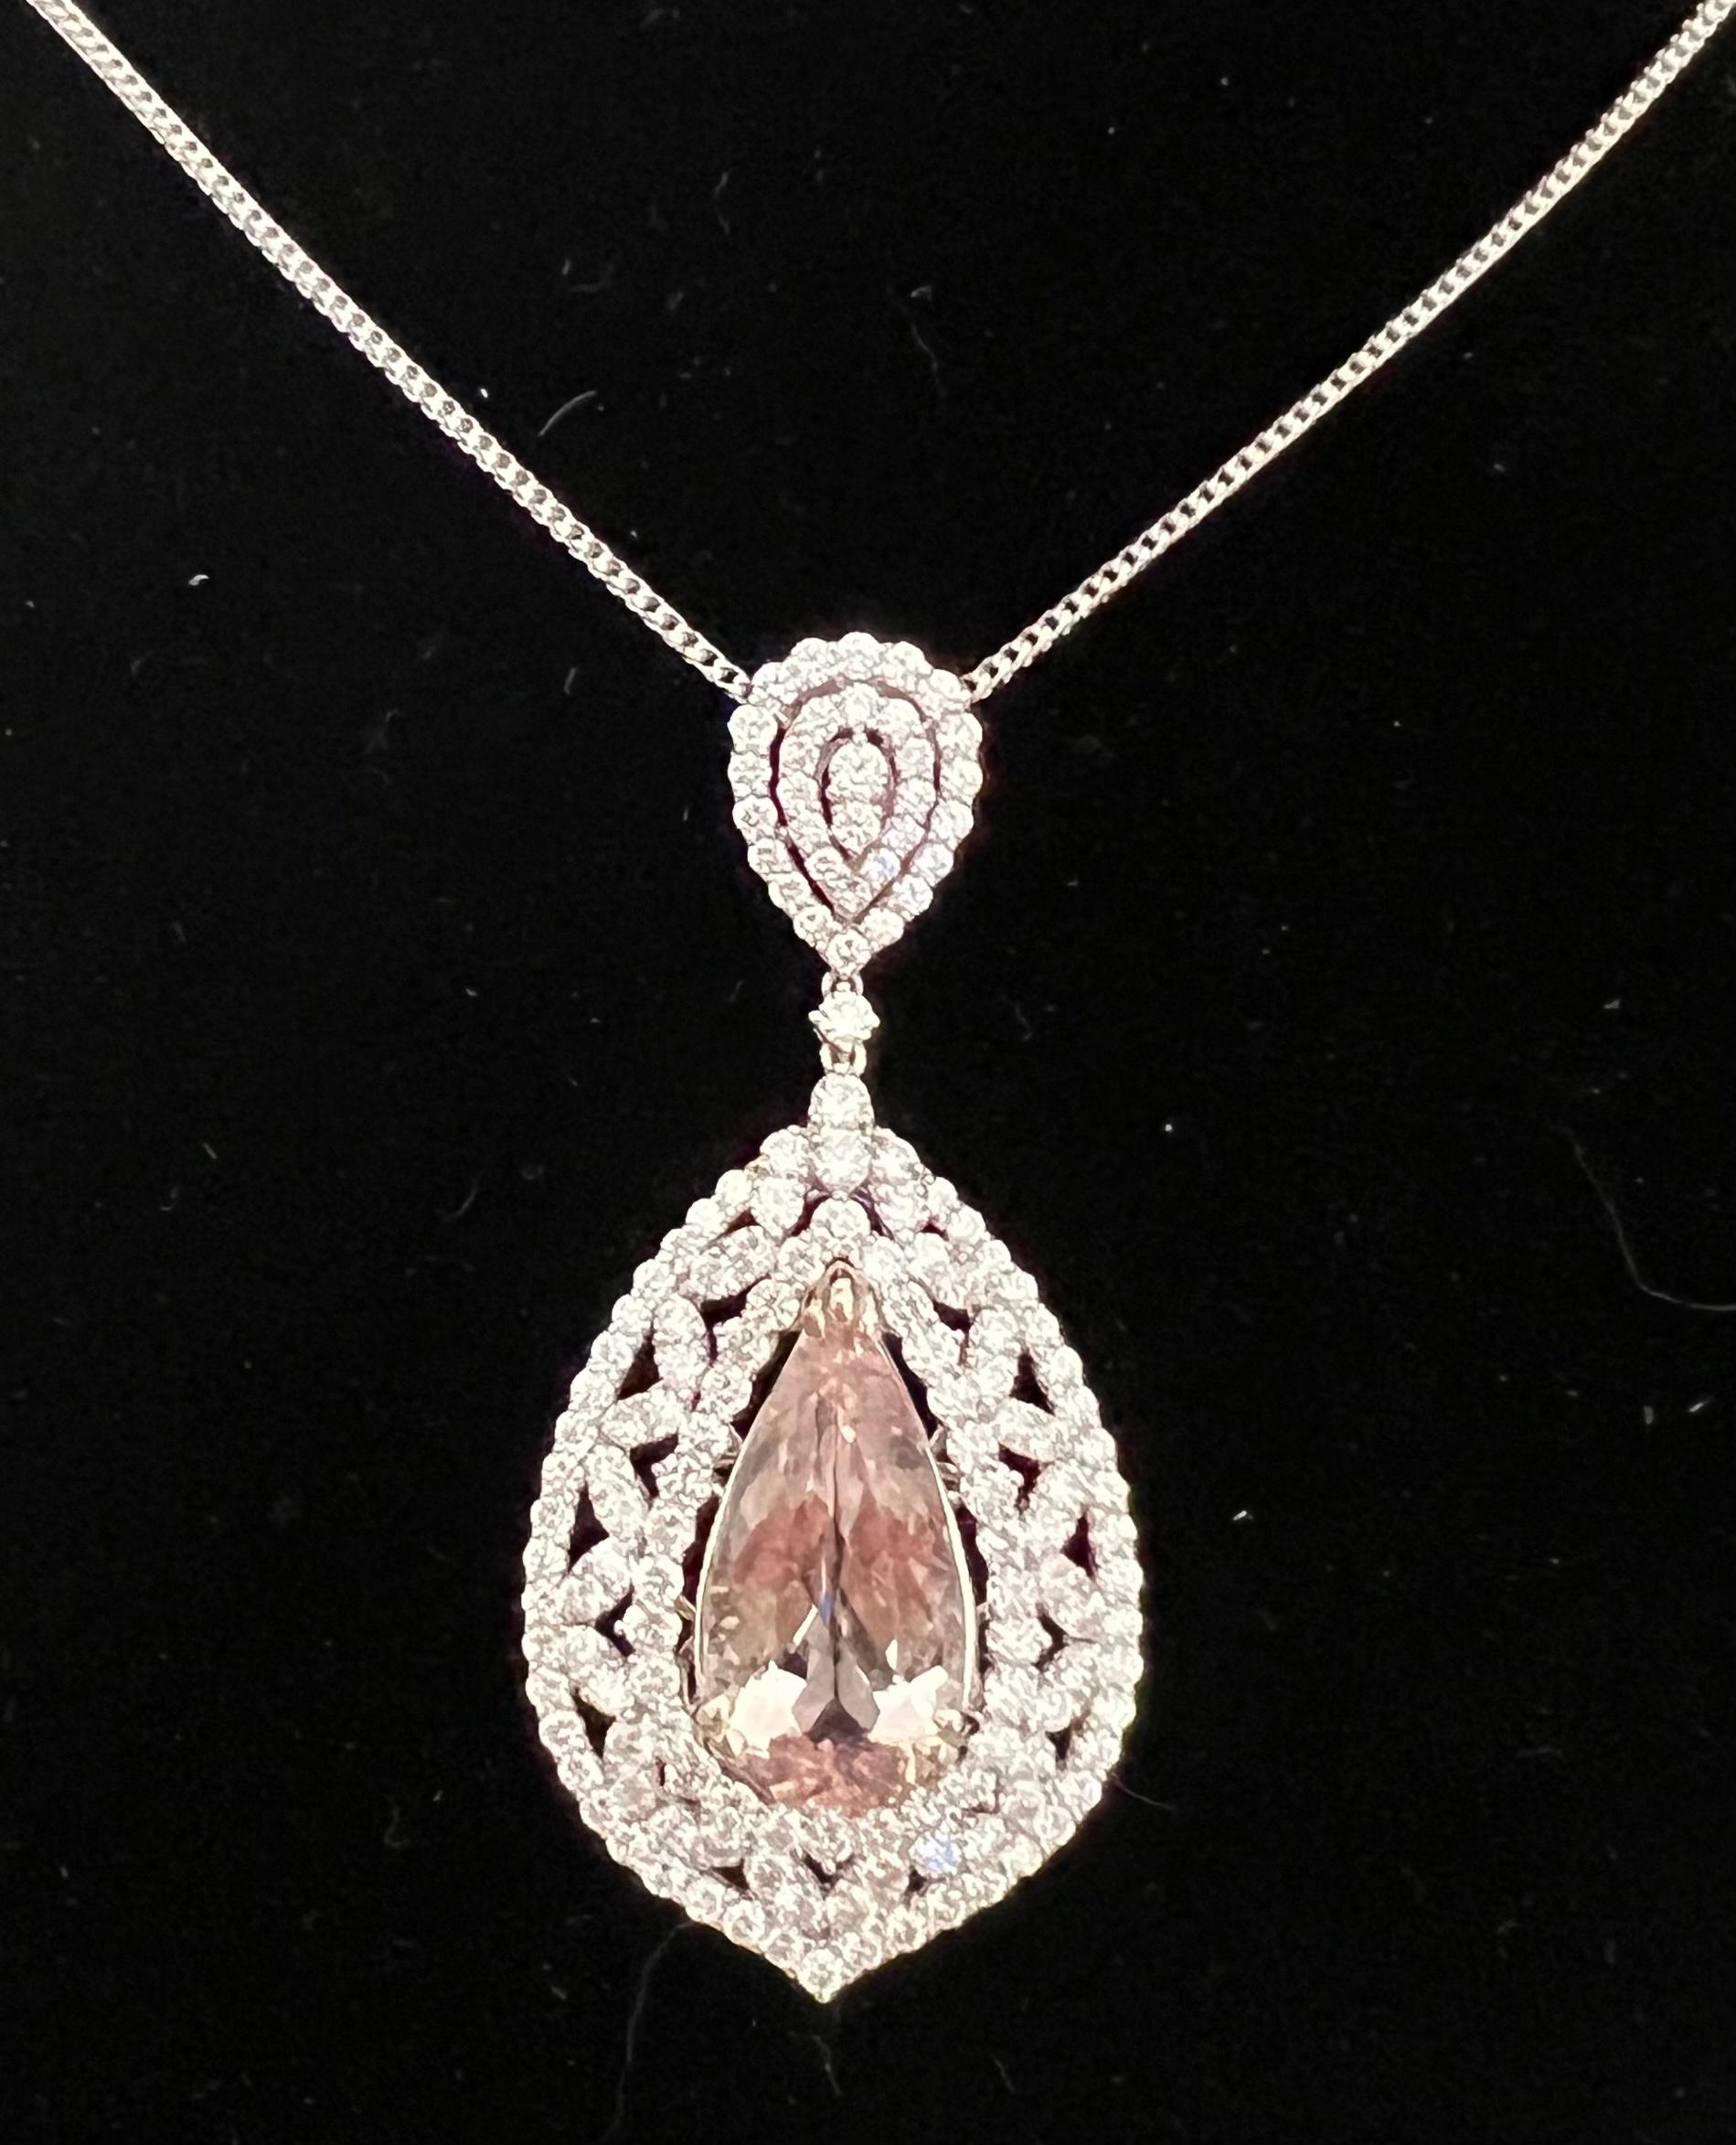 Artisan Exquisite 17 Carat Pink Morganite and Diamond Pendant Necklace in 18K White Gold For Sale